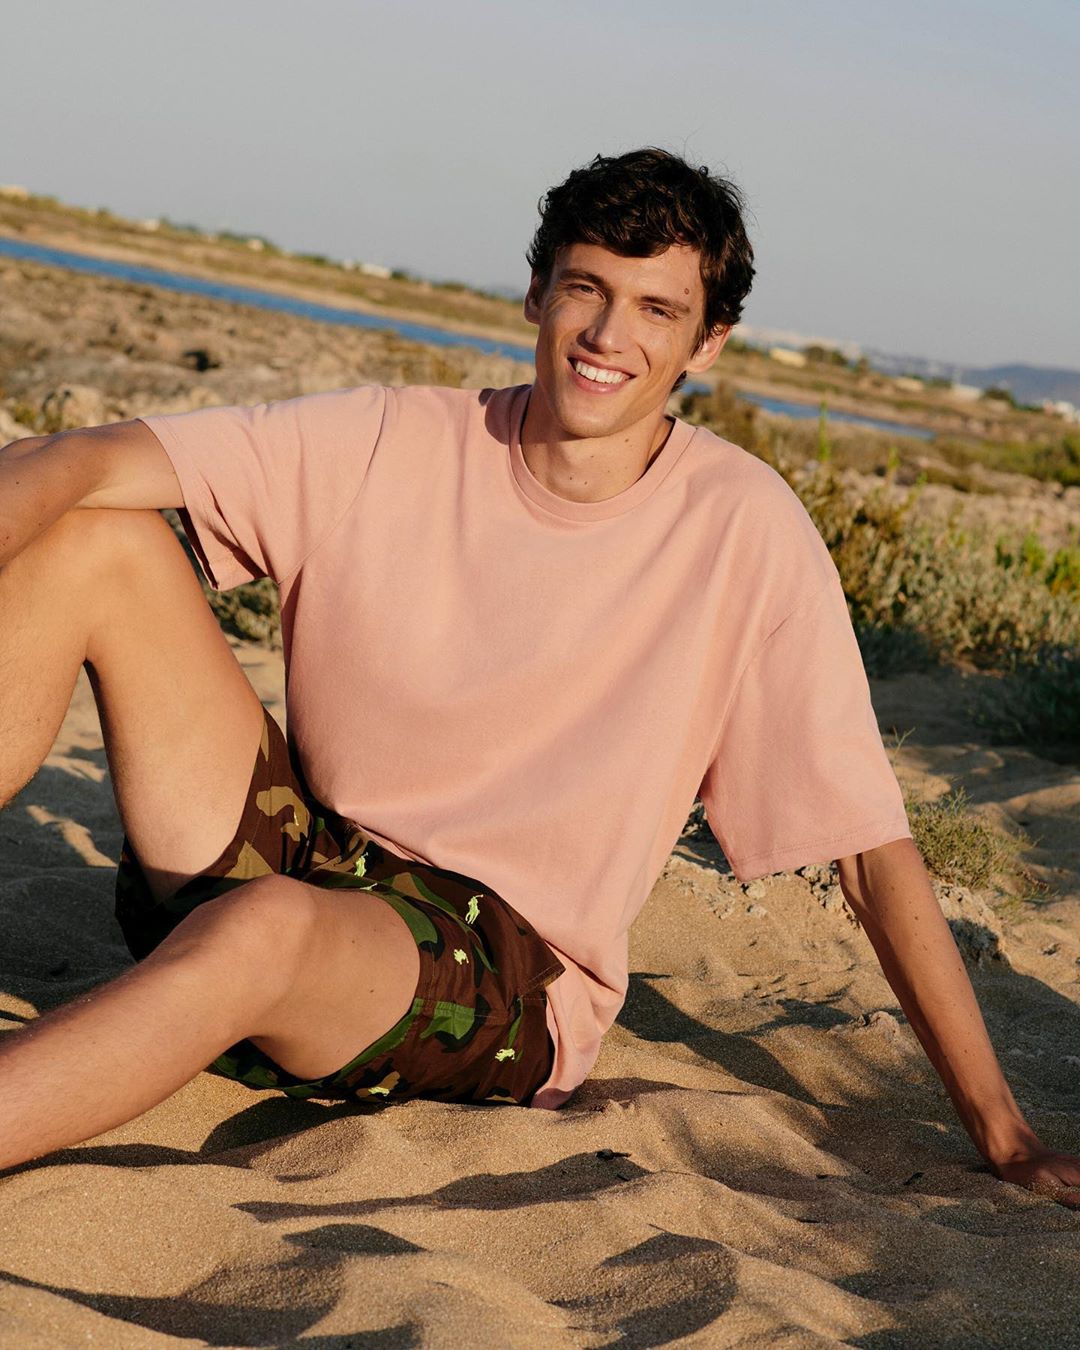 YOOX - Make sure you've got all the right pieces to make your summer vacation perfect. Discover them all on YOOX